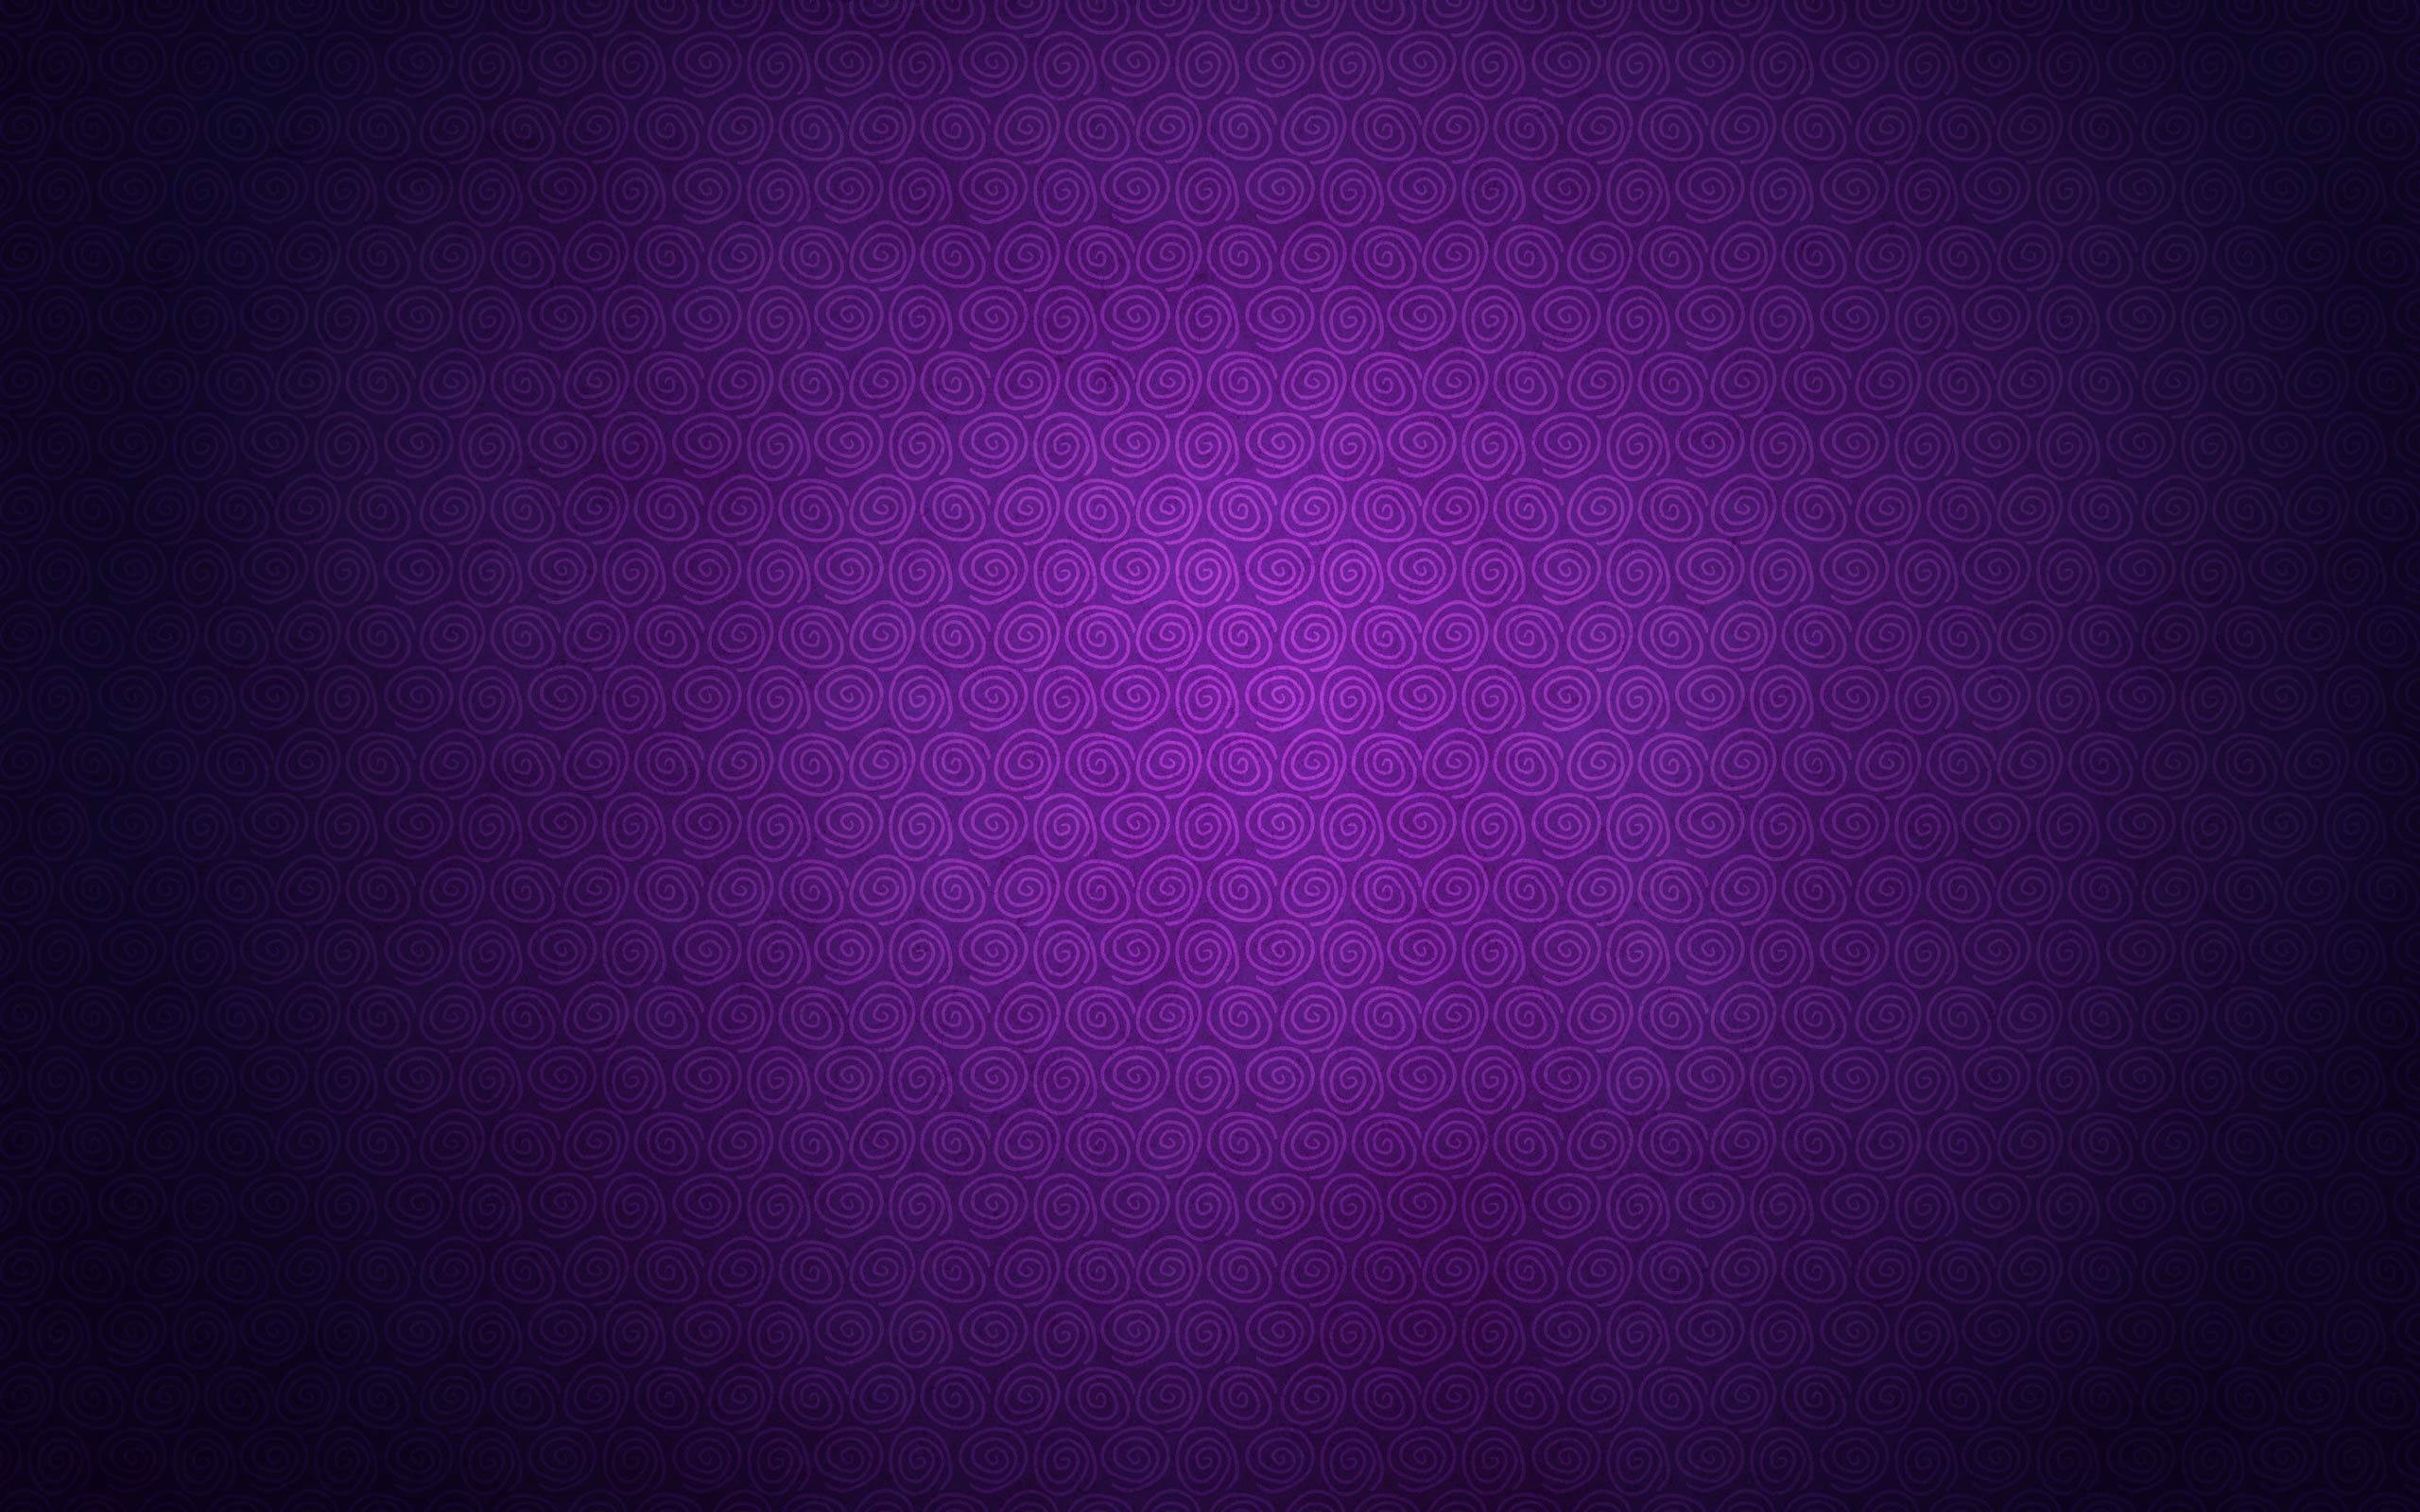 2560x1600 free twinkle stars purple backgrounds download high definiton wallpapers  desktop images windows 10 backgrounds colourful free download wallpapers  cool best ...